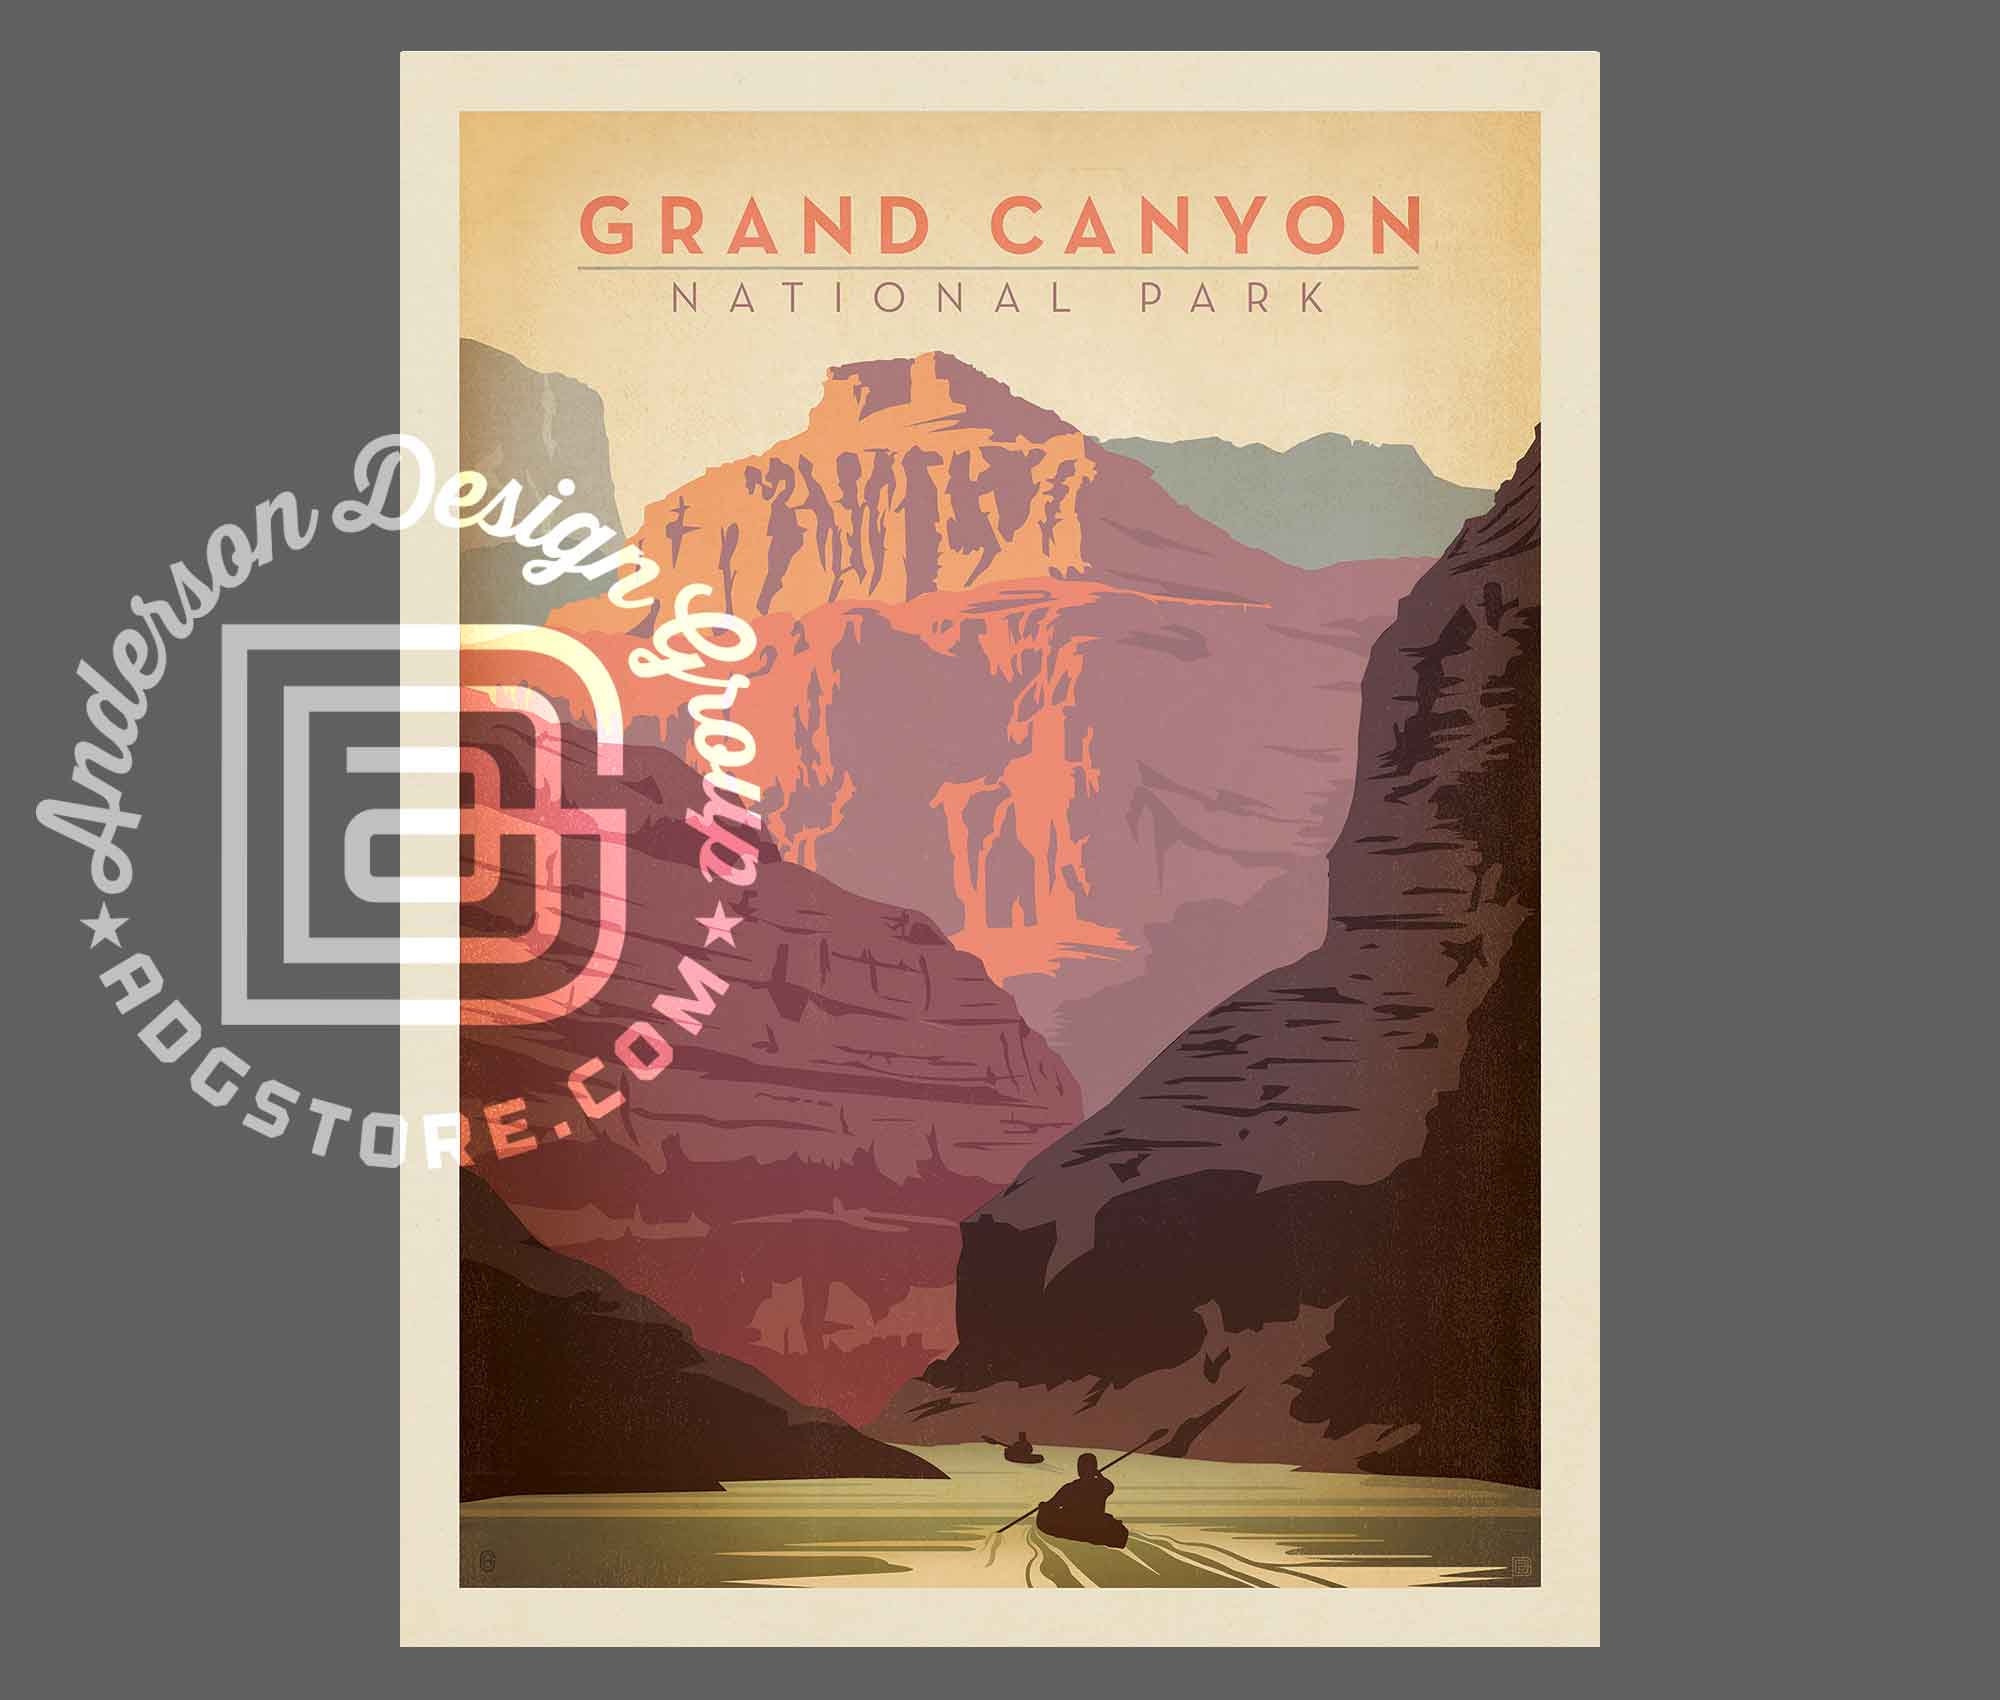 Grand Canyon Kayak National Park Travel Poster by Anderson - Etsy